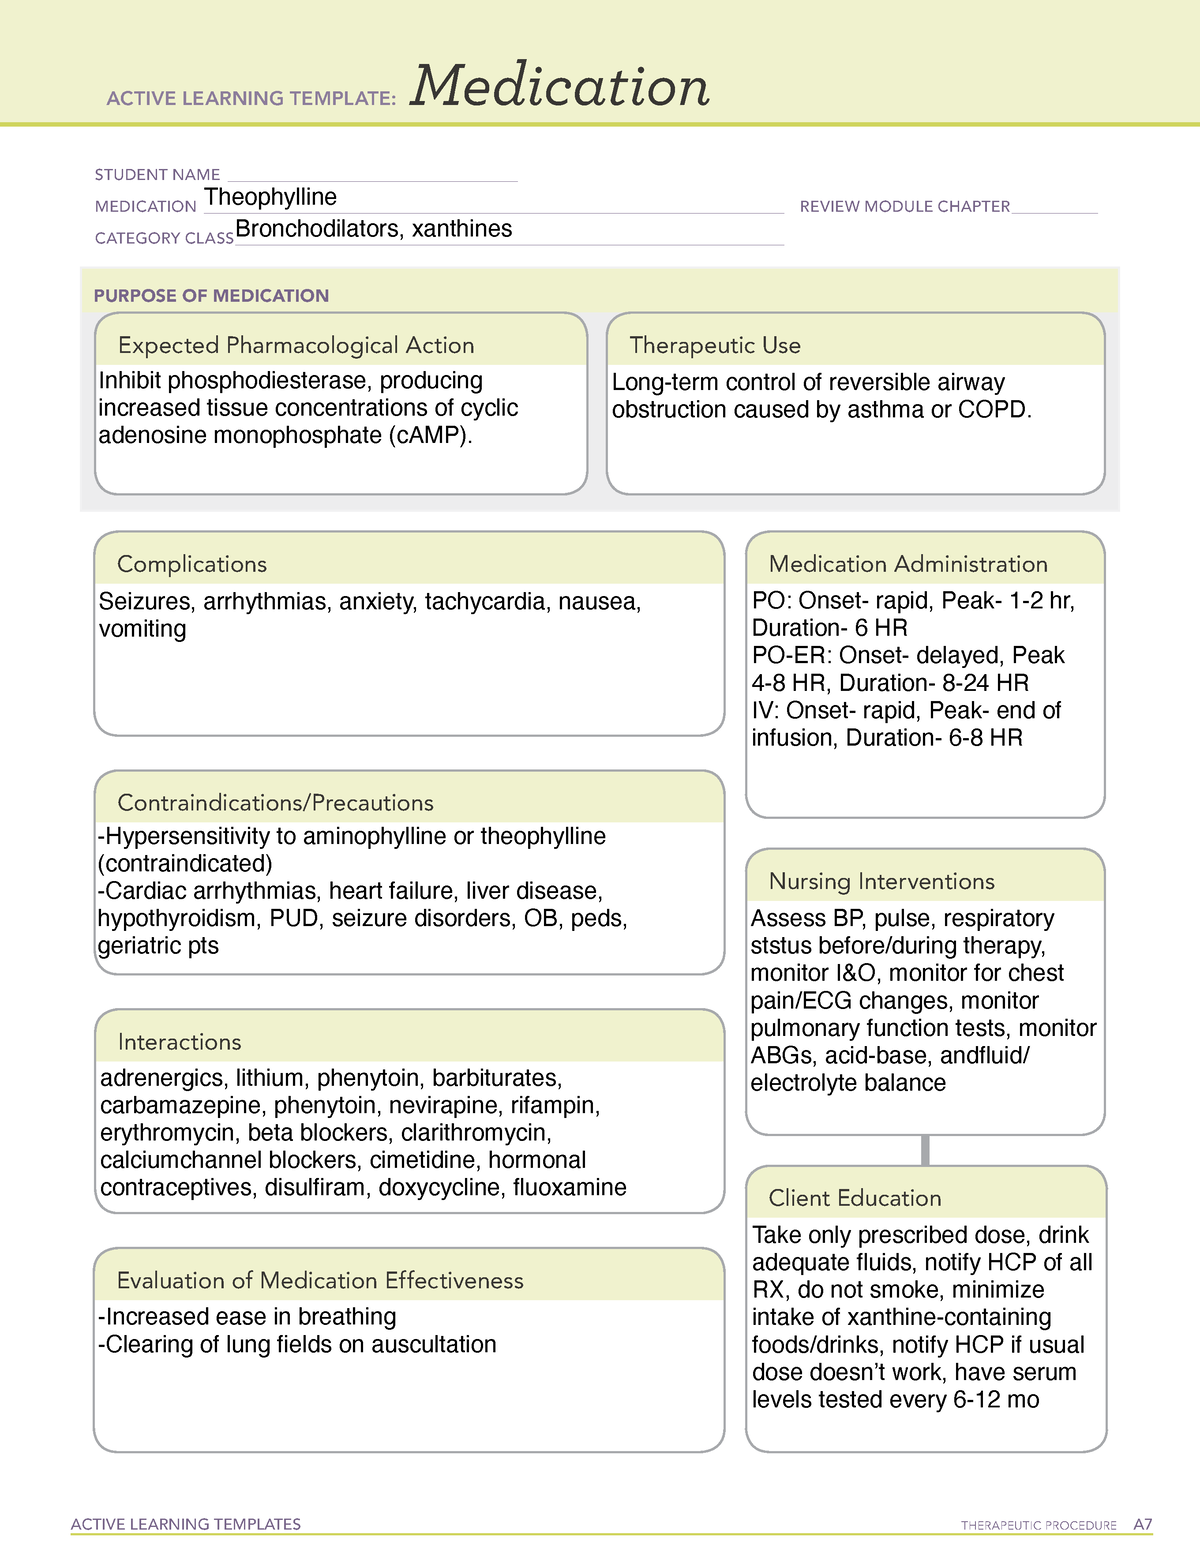 theophylline-active-learning-templates-therapeutic-procedure-a